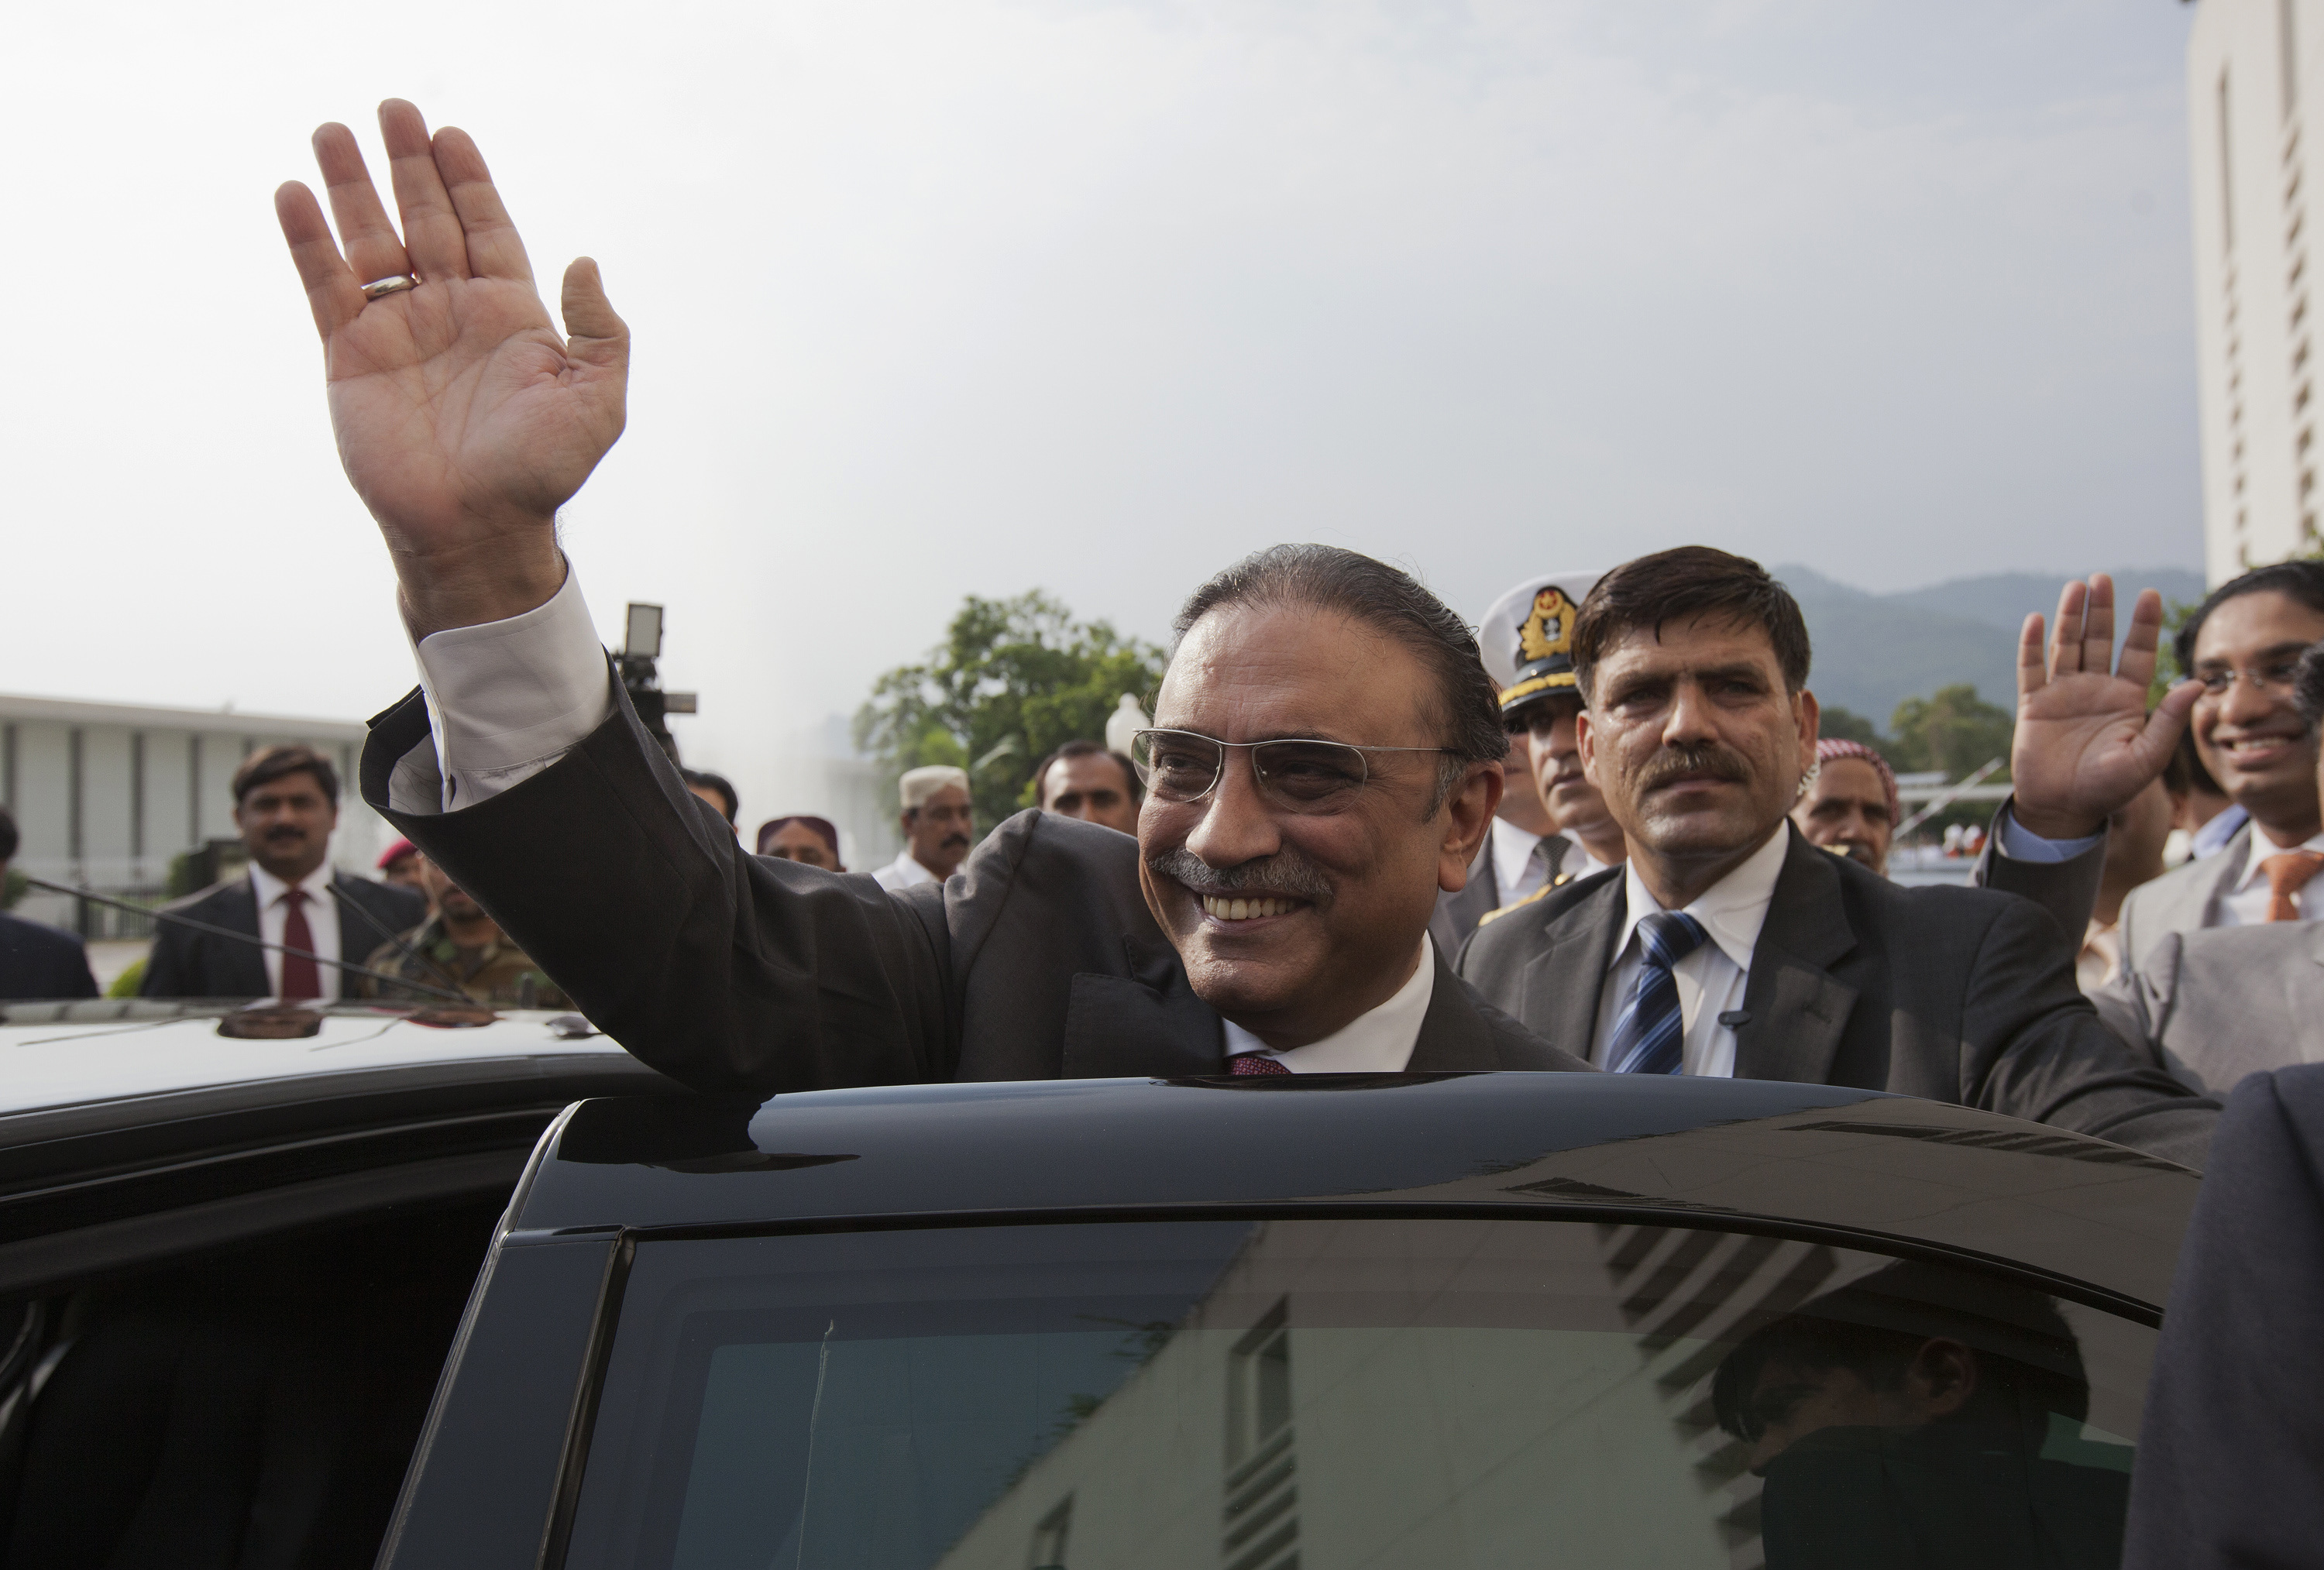 Pakistan's outgoing President Zardari waves as he leaves after a farewell ceremony at the President House in Islamabad